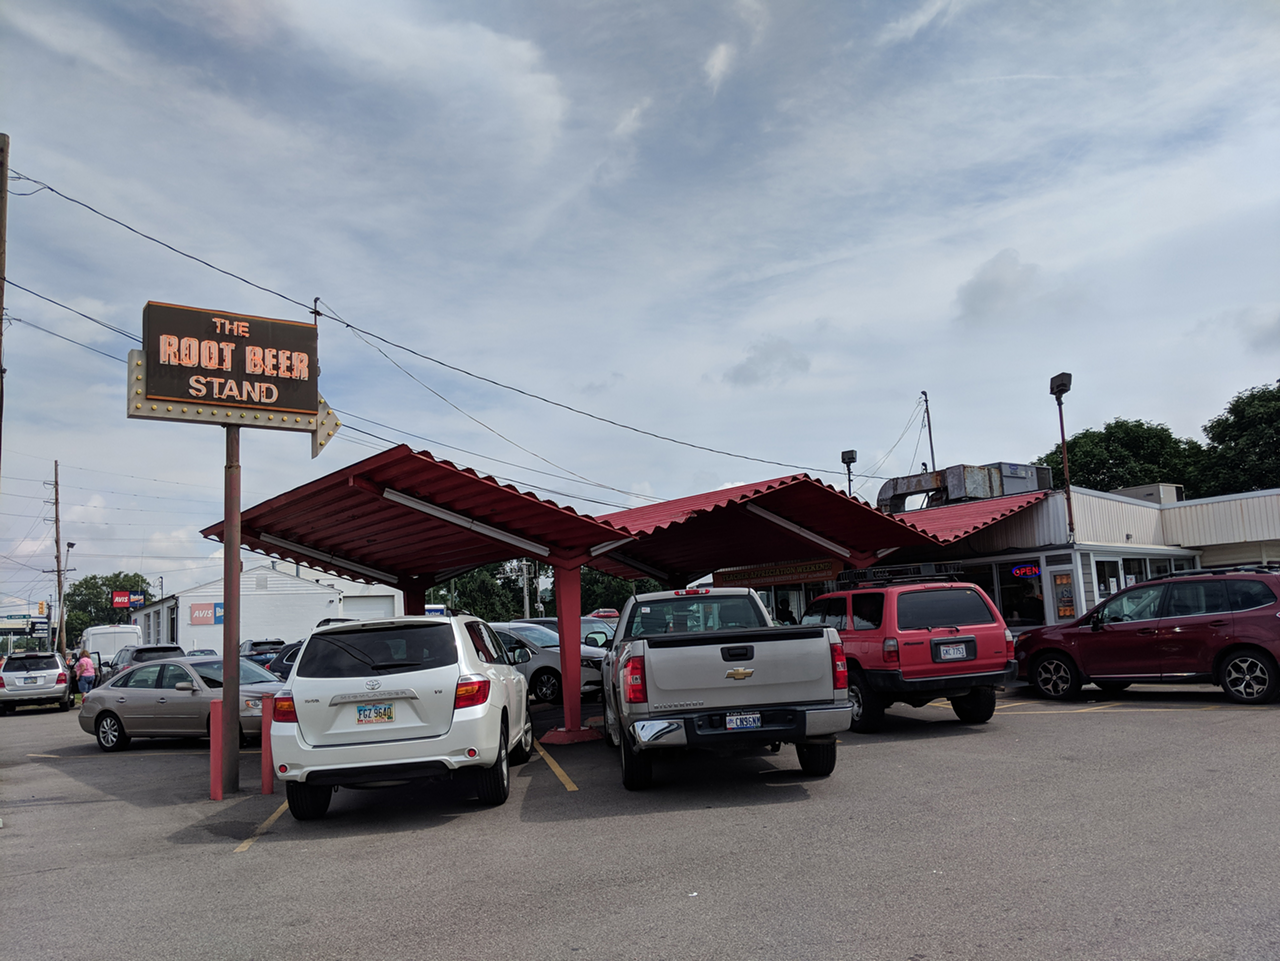 The Root Beer Stand (11566 Reading Road, Sharonville): A seasonal hotspot for Cincinnatians. The stand has been around since 1957 and serves up housemade root beer and special recipe chili.